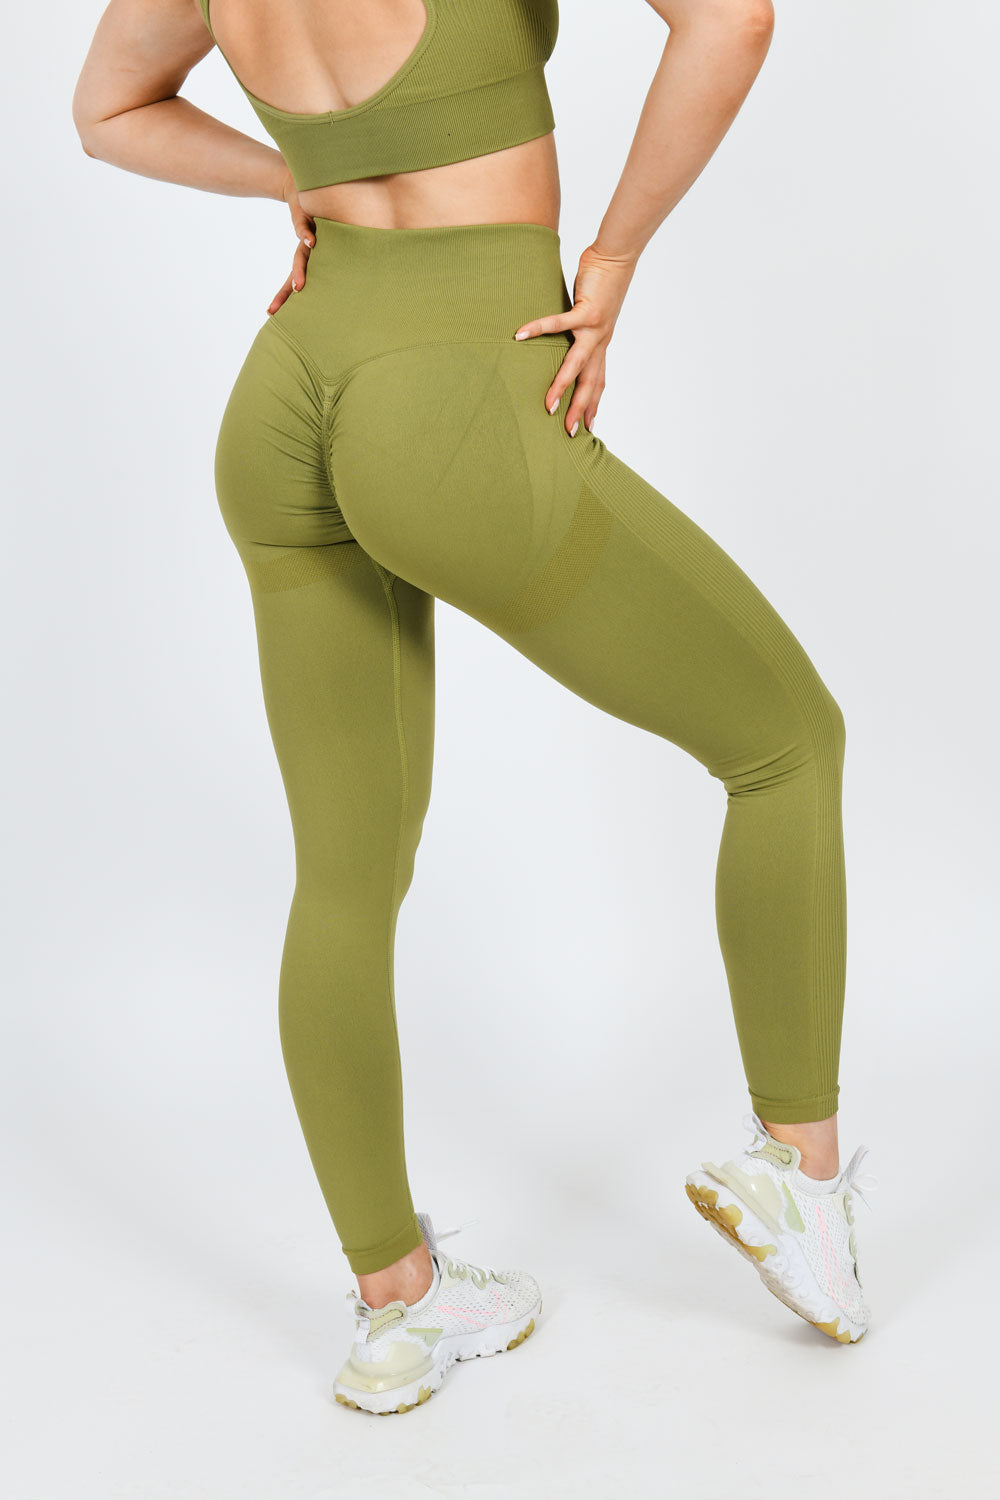 19 Best Workout Leggings Brands For Every Type Of Exercise – 2023 | Workout  leggings, Fun workouts, Leggings